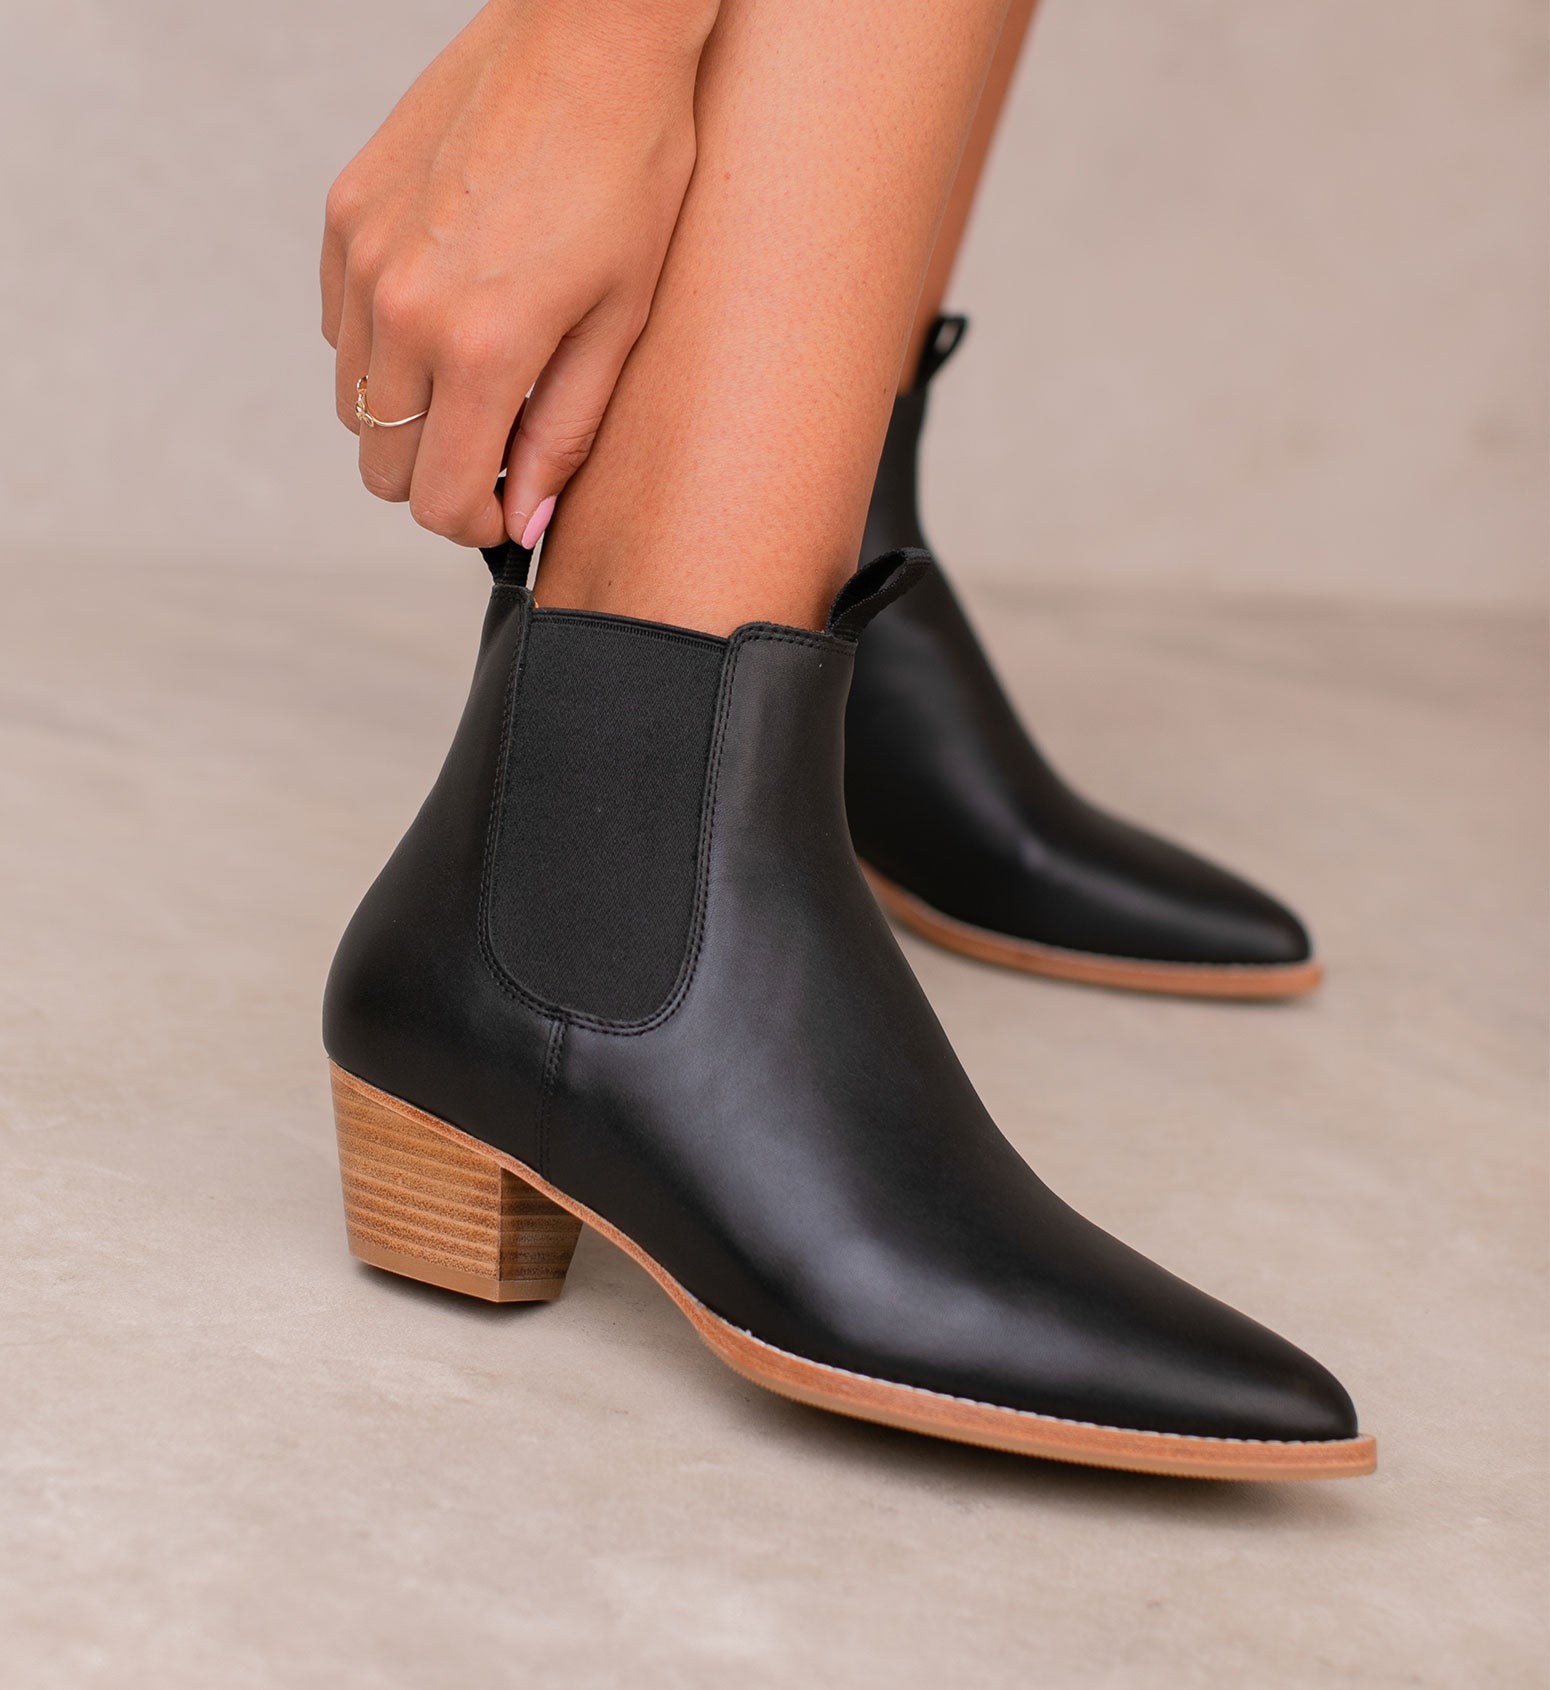 OFFICE Ashleigh Flat Ankle Boots Black Leather - Women's Ankle Boots